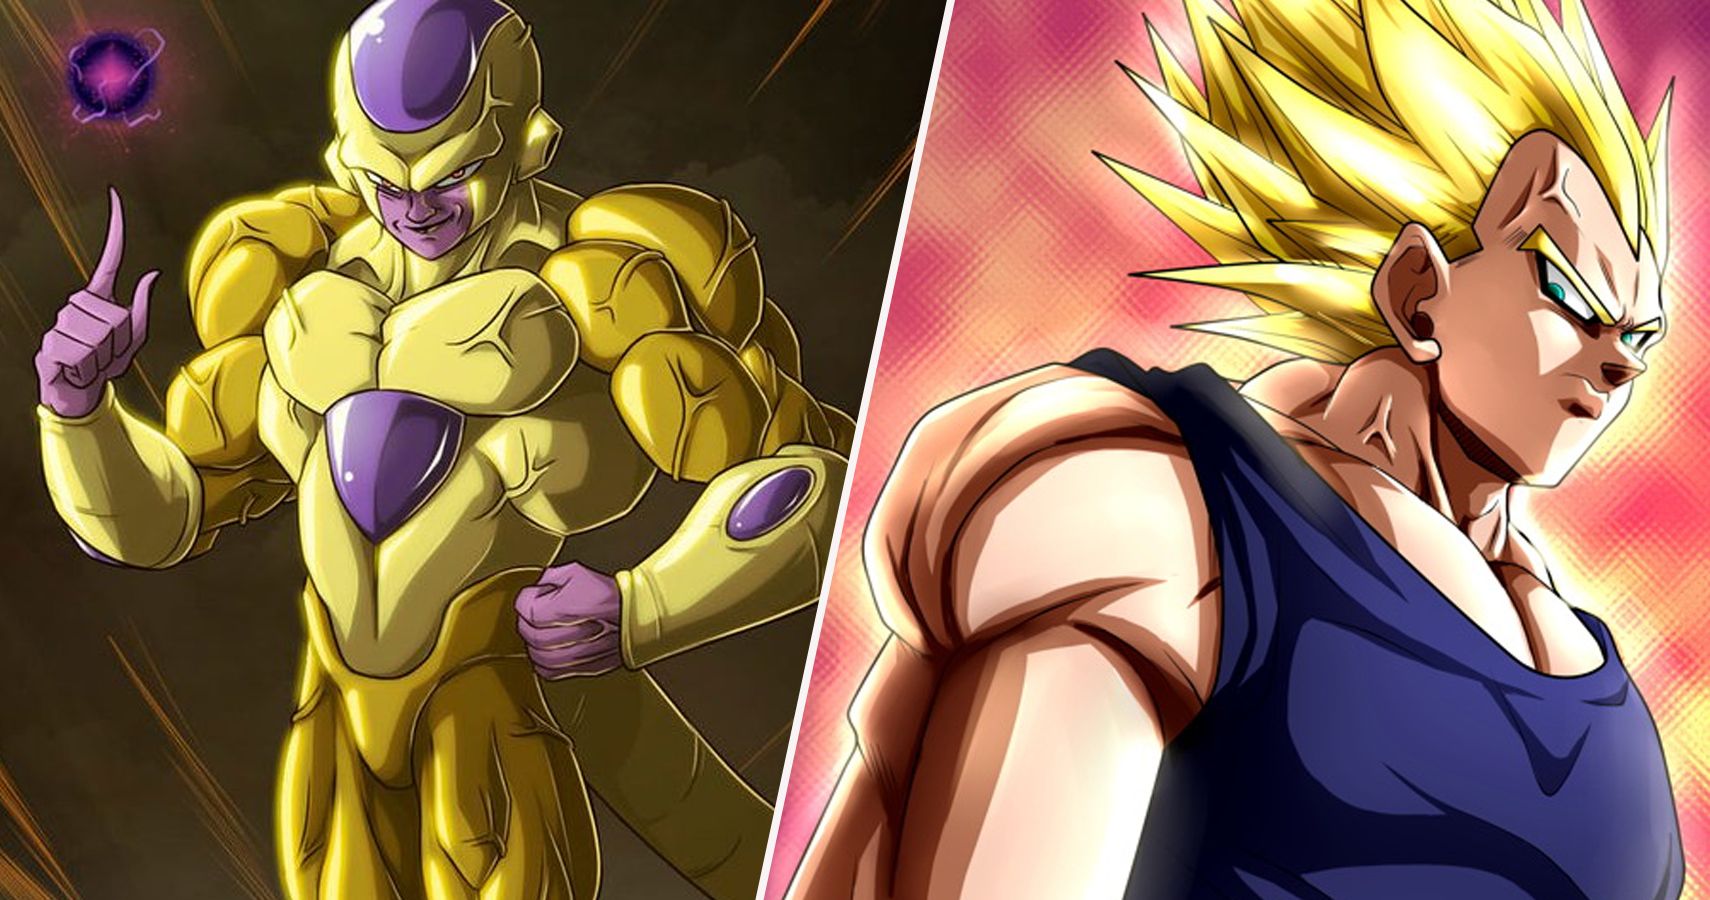 The 15 Strongest Anime Power Ups And Transformations, Ranked